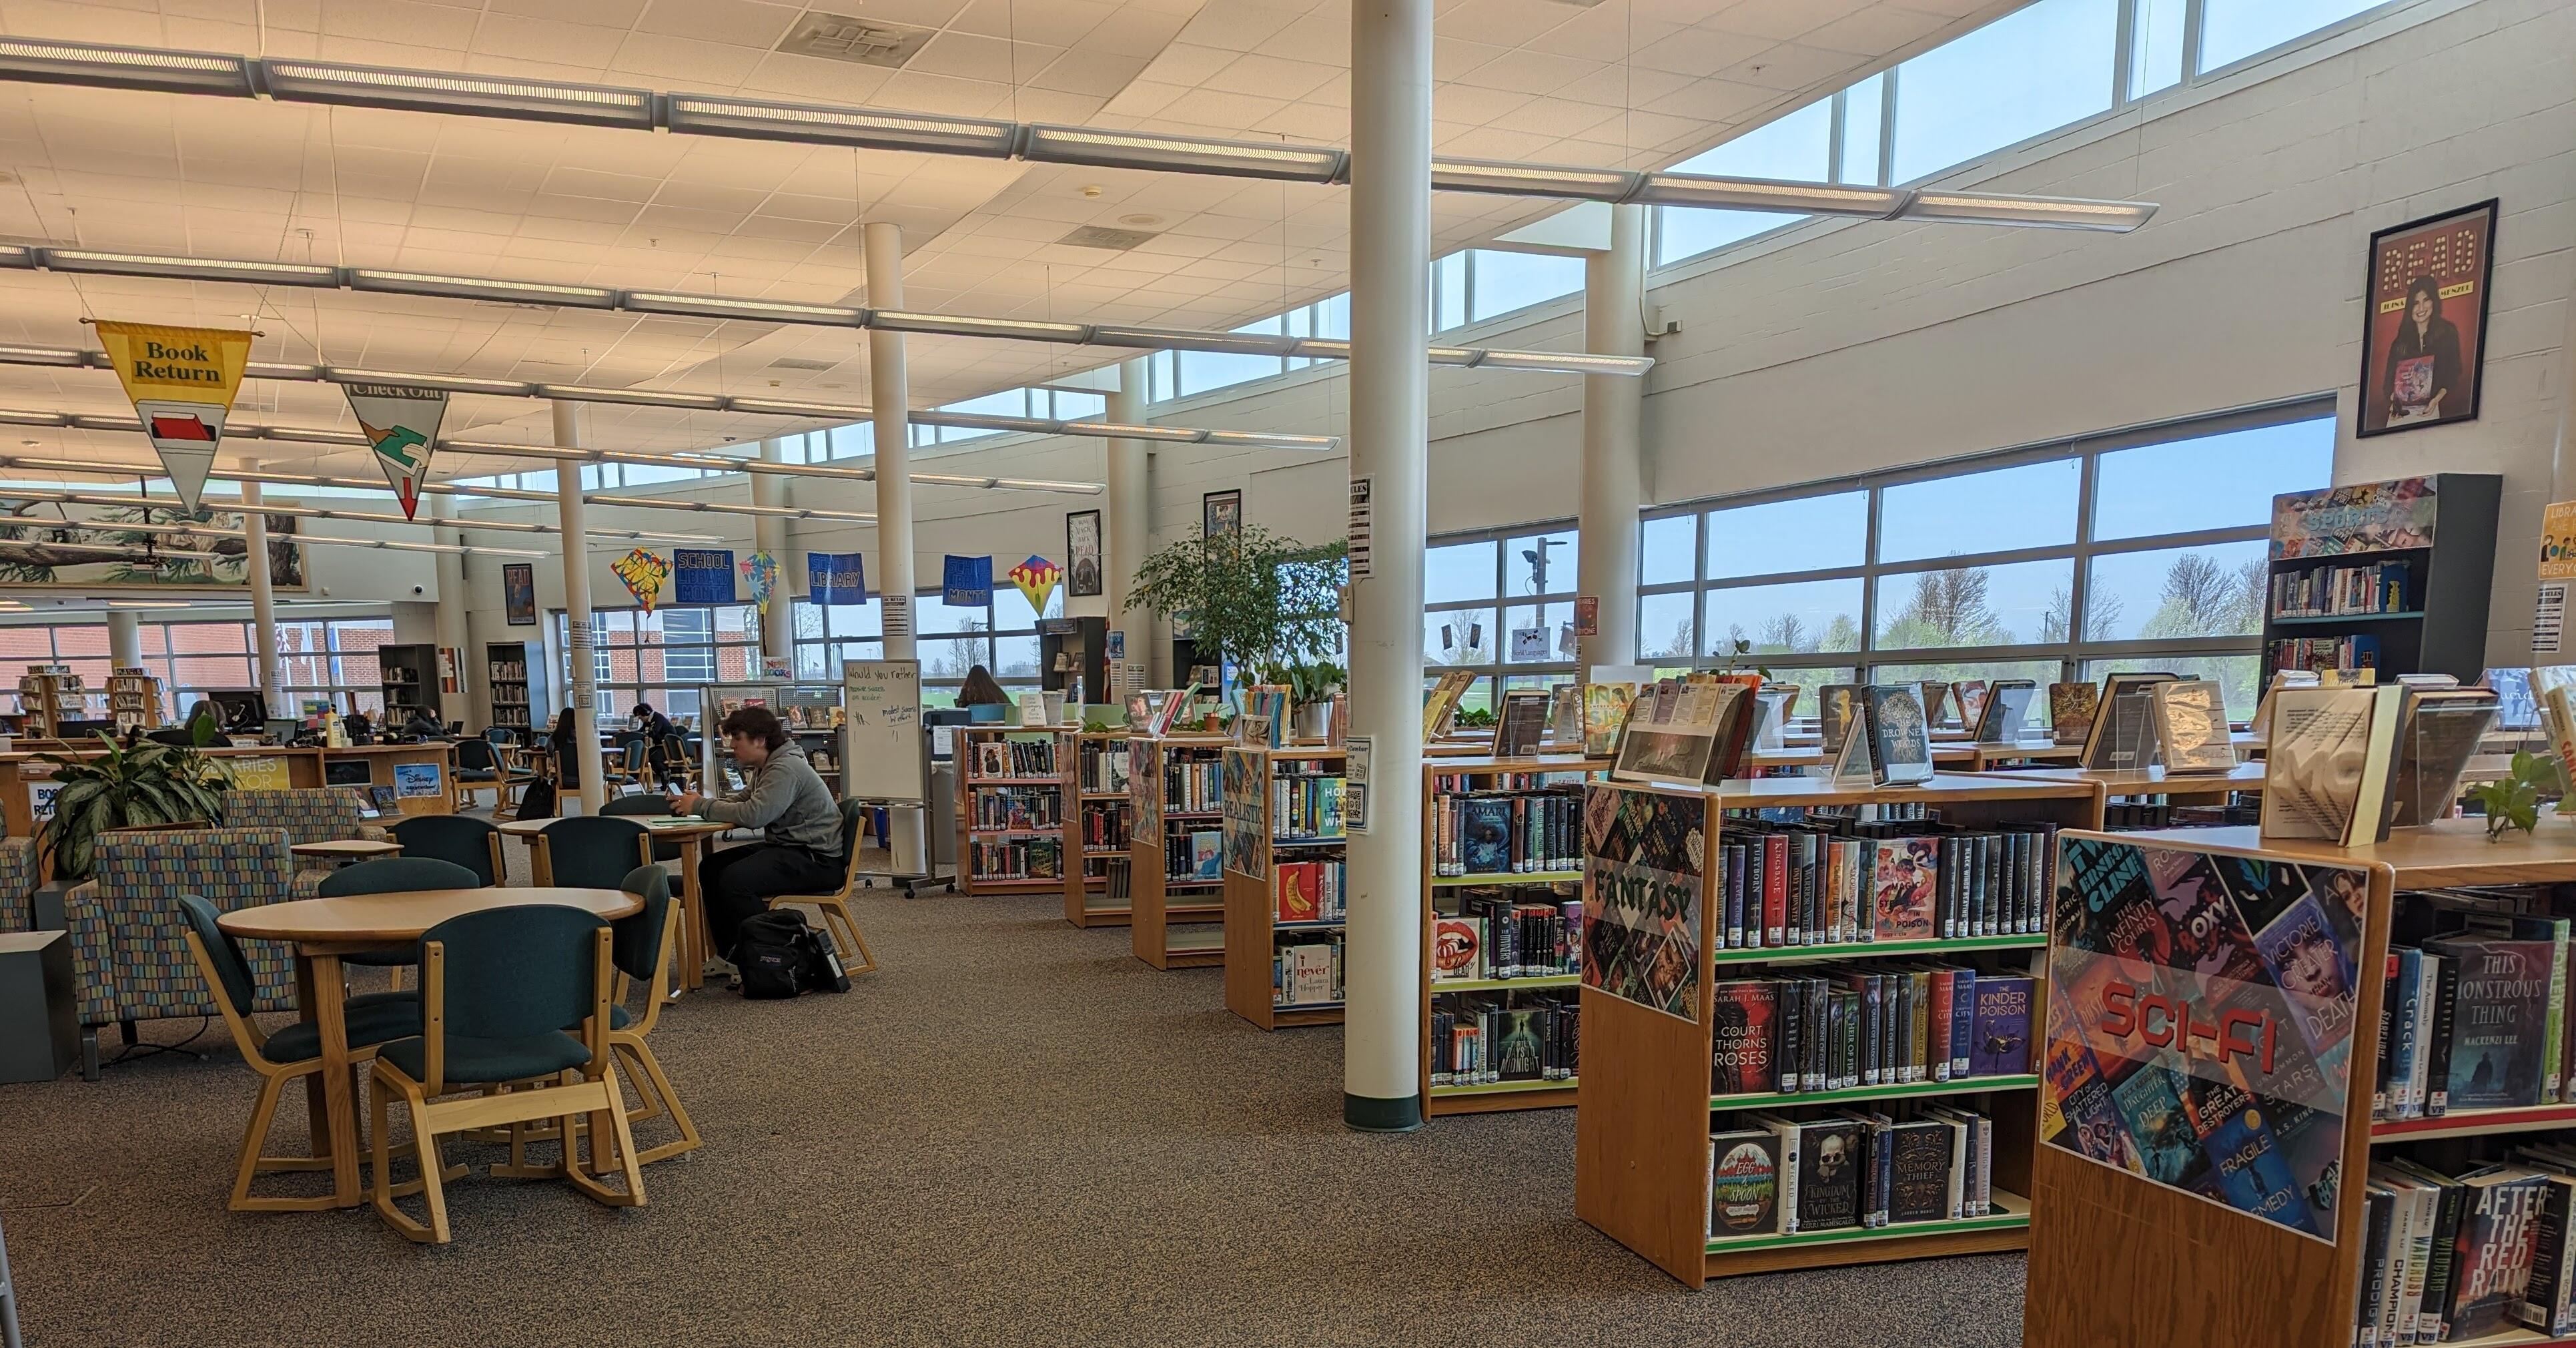 View of the Library Media Center